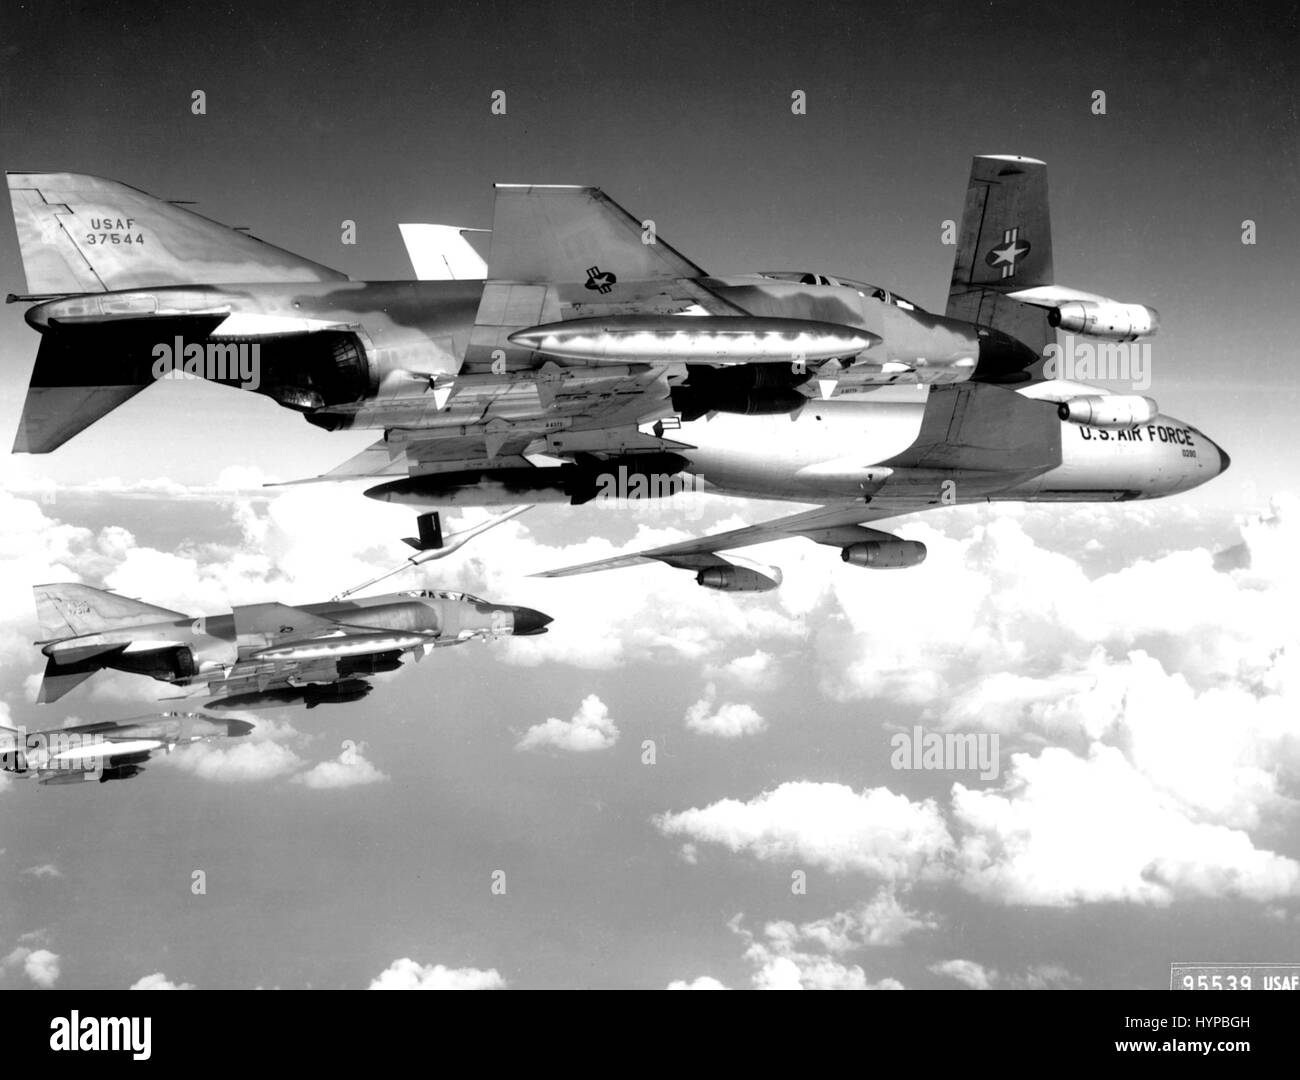 A flight of U.S. Air Force F-4C Phantom fighter bombers refuel from a KC-135 tanker aircraft prior to making a strike against communist targets in North Vietnam.  The Phantoms are fully loaded with 750 pound general purpose bombs and rockets, circa 1969. Stock Photo